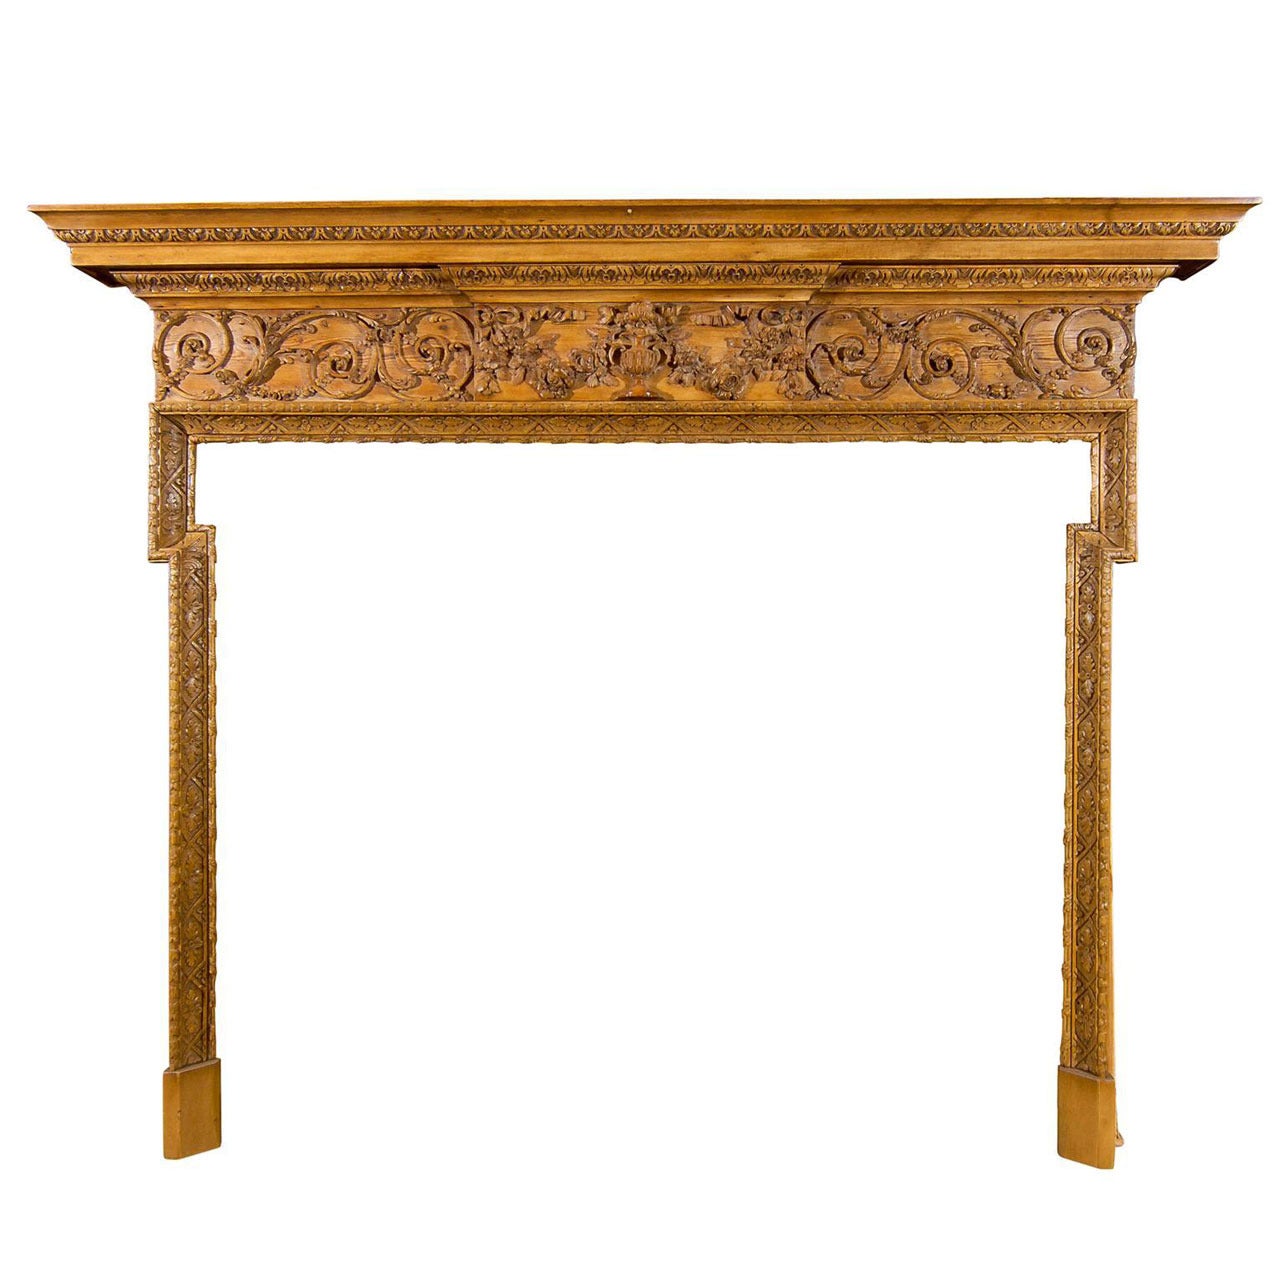 Early 19th c. Finely Carved Pine Georgian Mantel For Sale